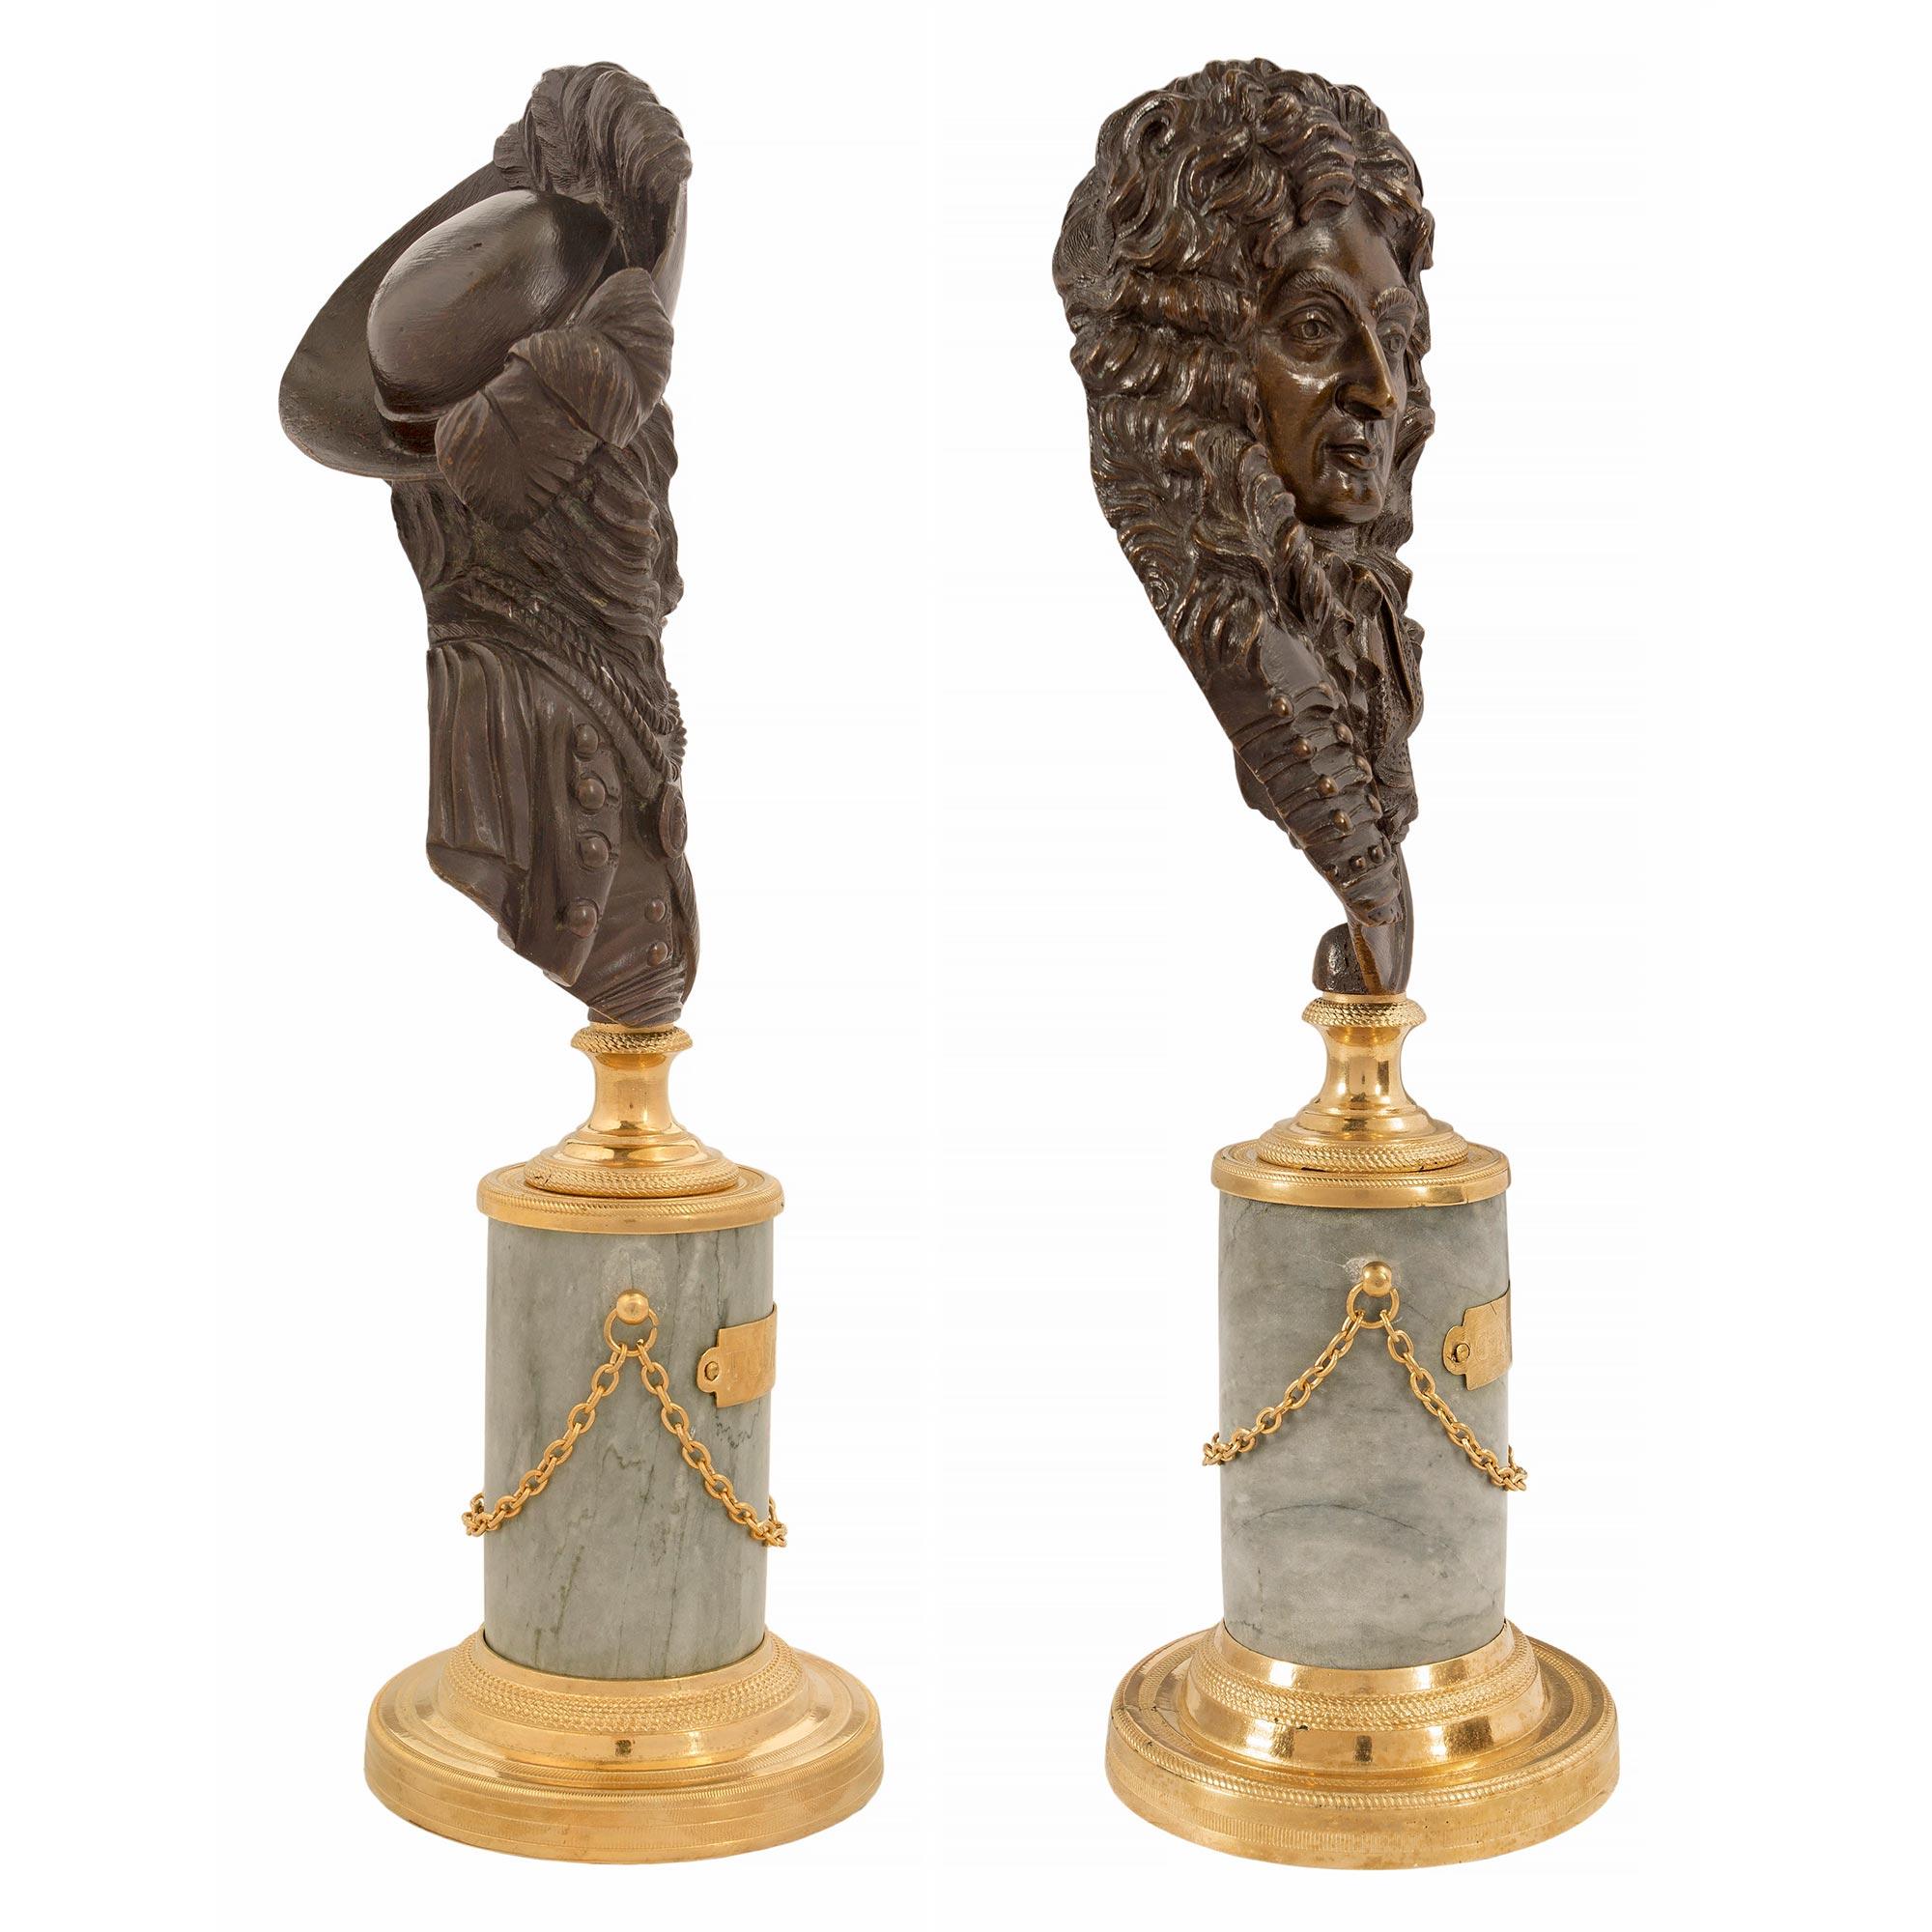 A fine pair of French 19th century Louis XVI st. patinated bronze, ormolu and Gris St. Anne marble statuettes of Nicolas Catinat and the Count of Tourville, both Marshals of France. Each statue is raised by a circular mottled ormolu base with